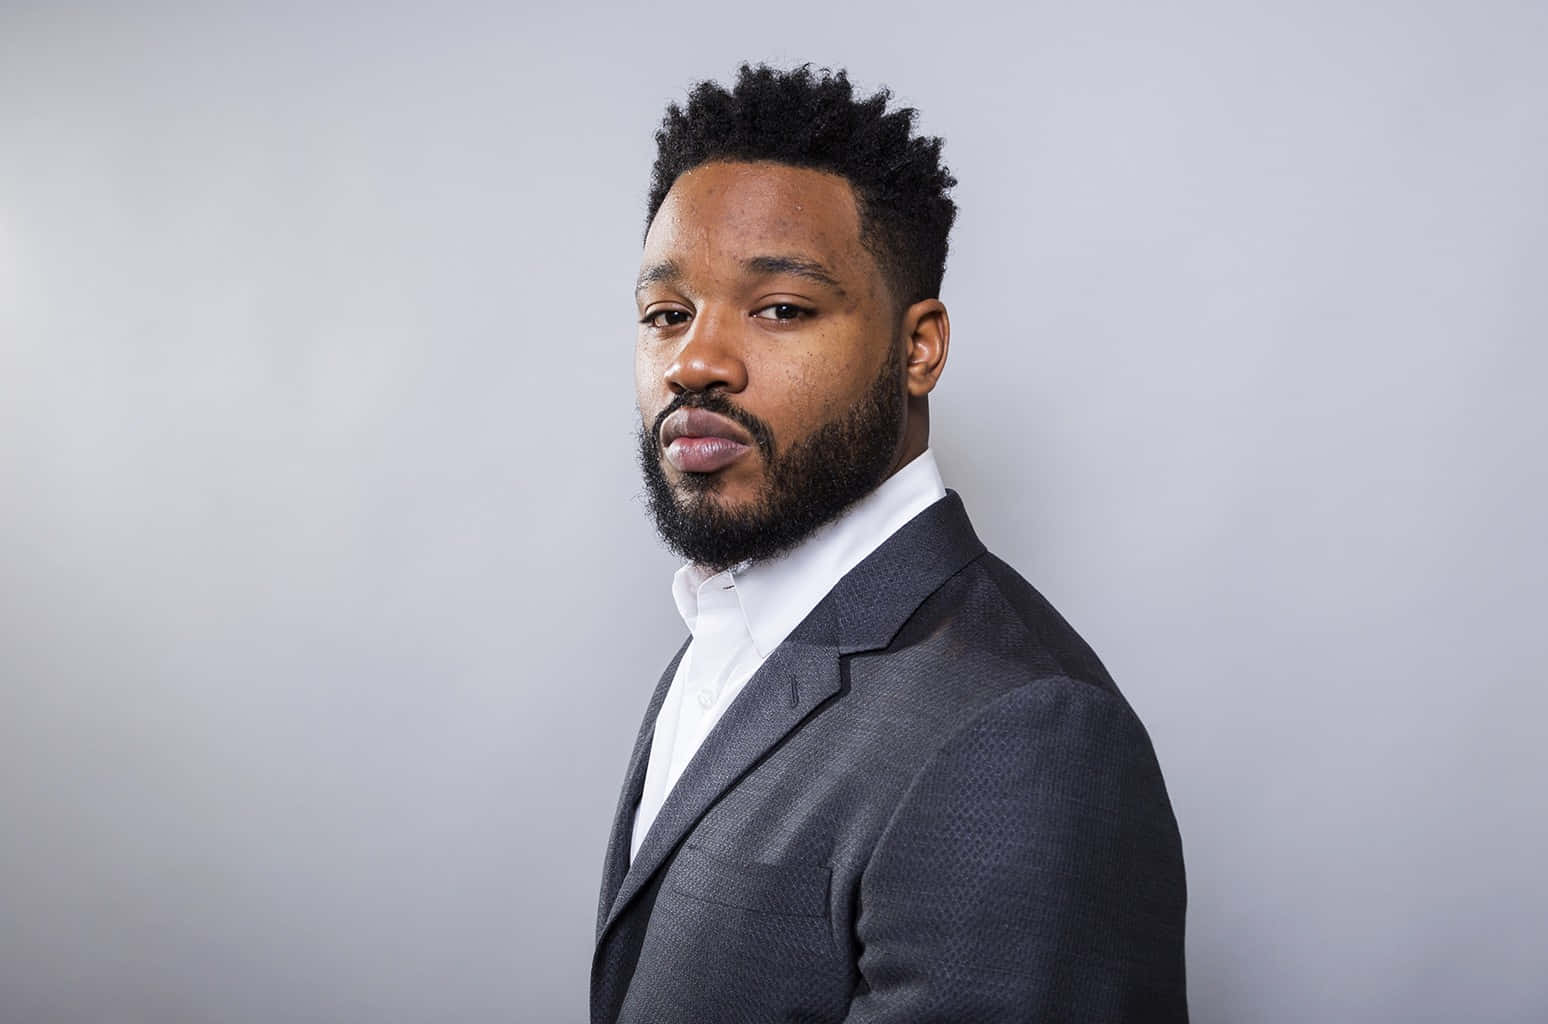 Ryan Coogler at a prestigious event looking confident and stylish Wallpaper